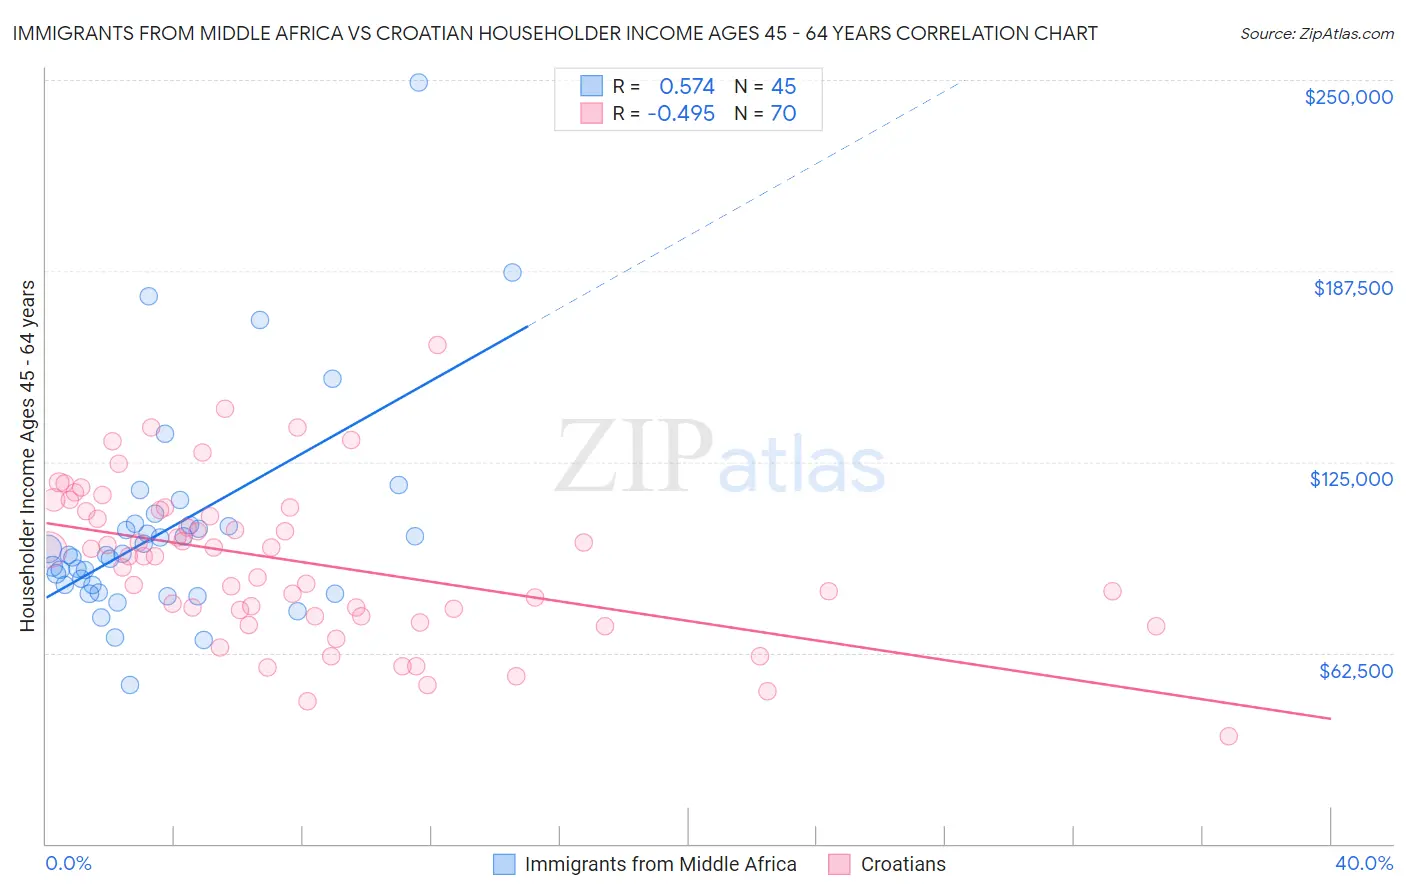 Immigrants from Middle Africa vs Croatian Householder Income Ages 45 - 64 years